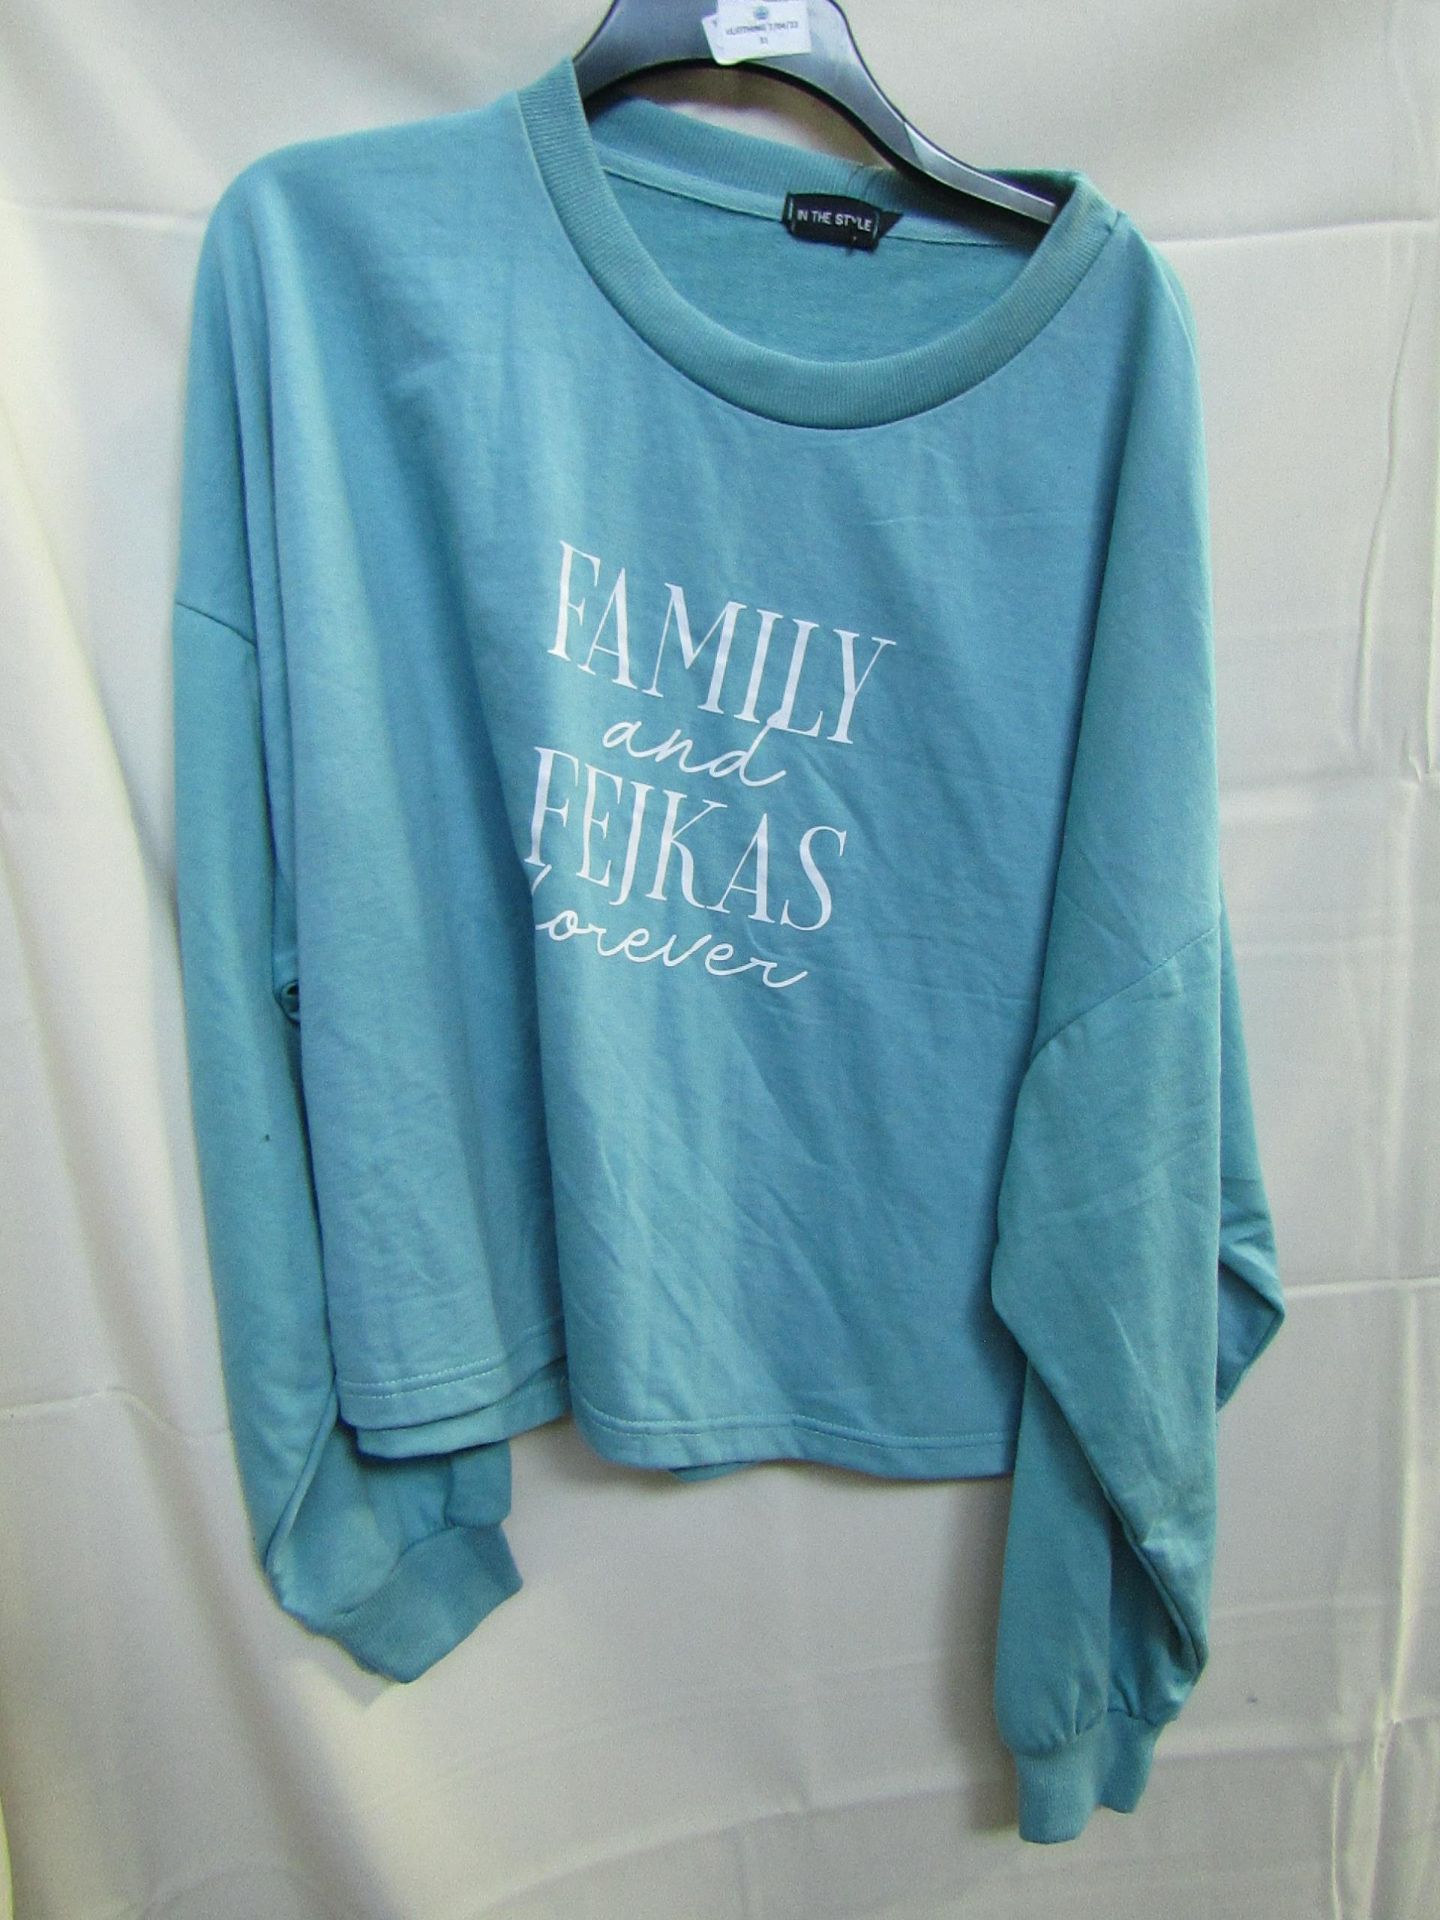 In the Style Sweat shirt, size 20. Sample